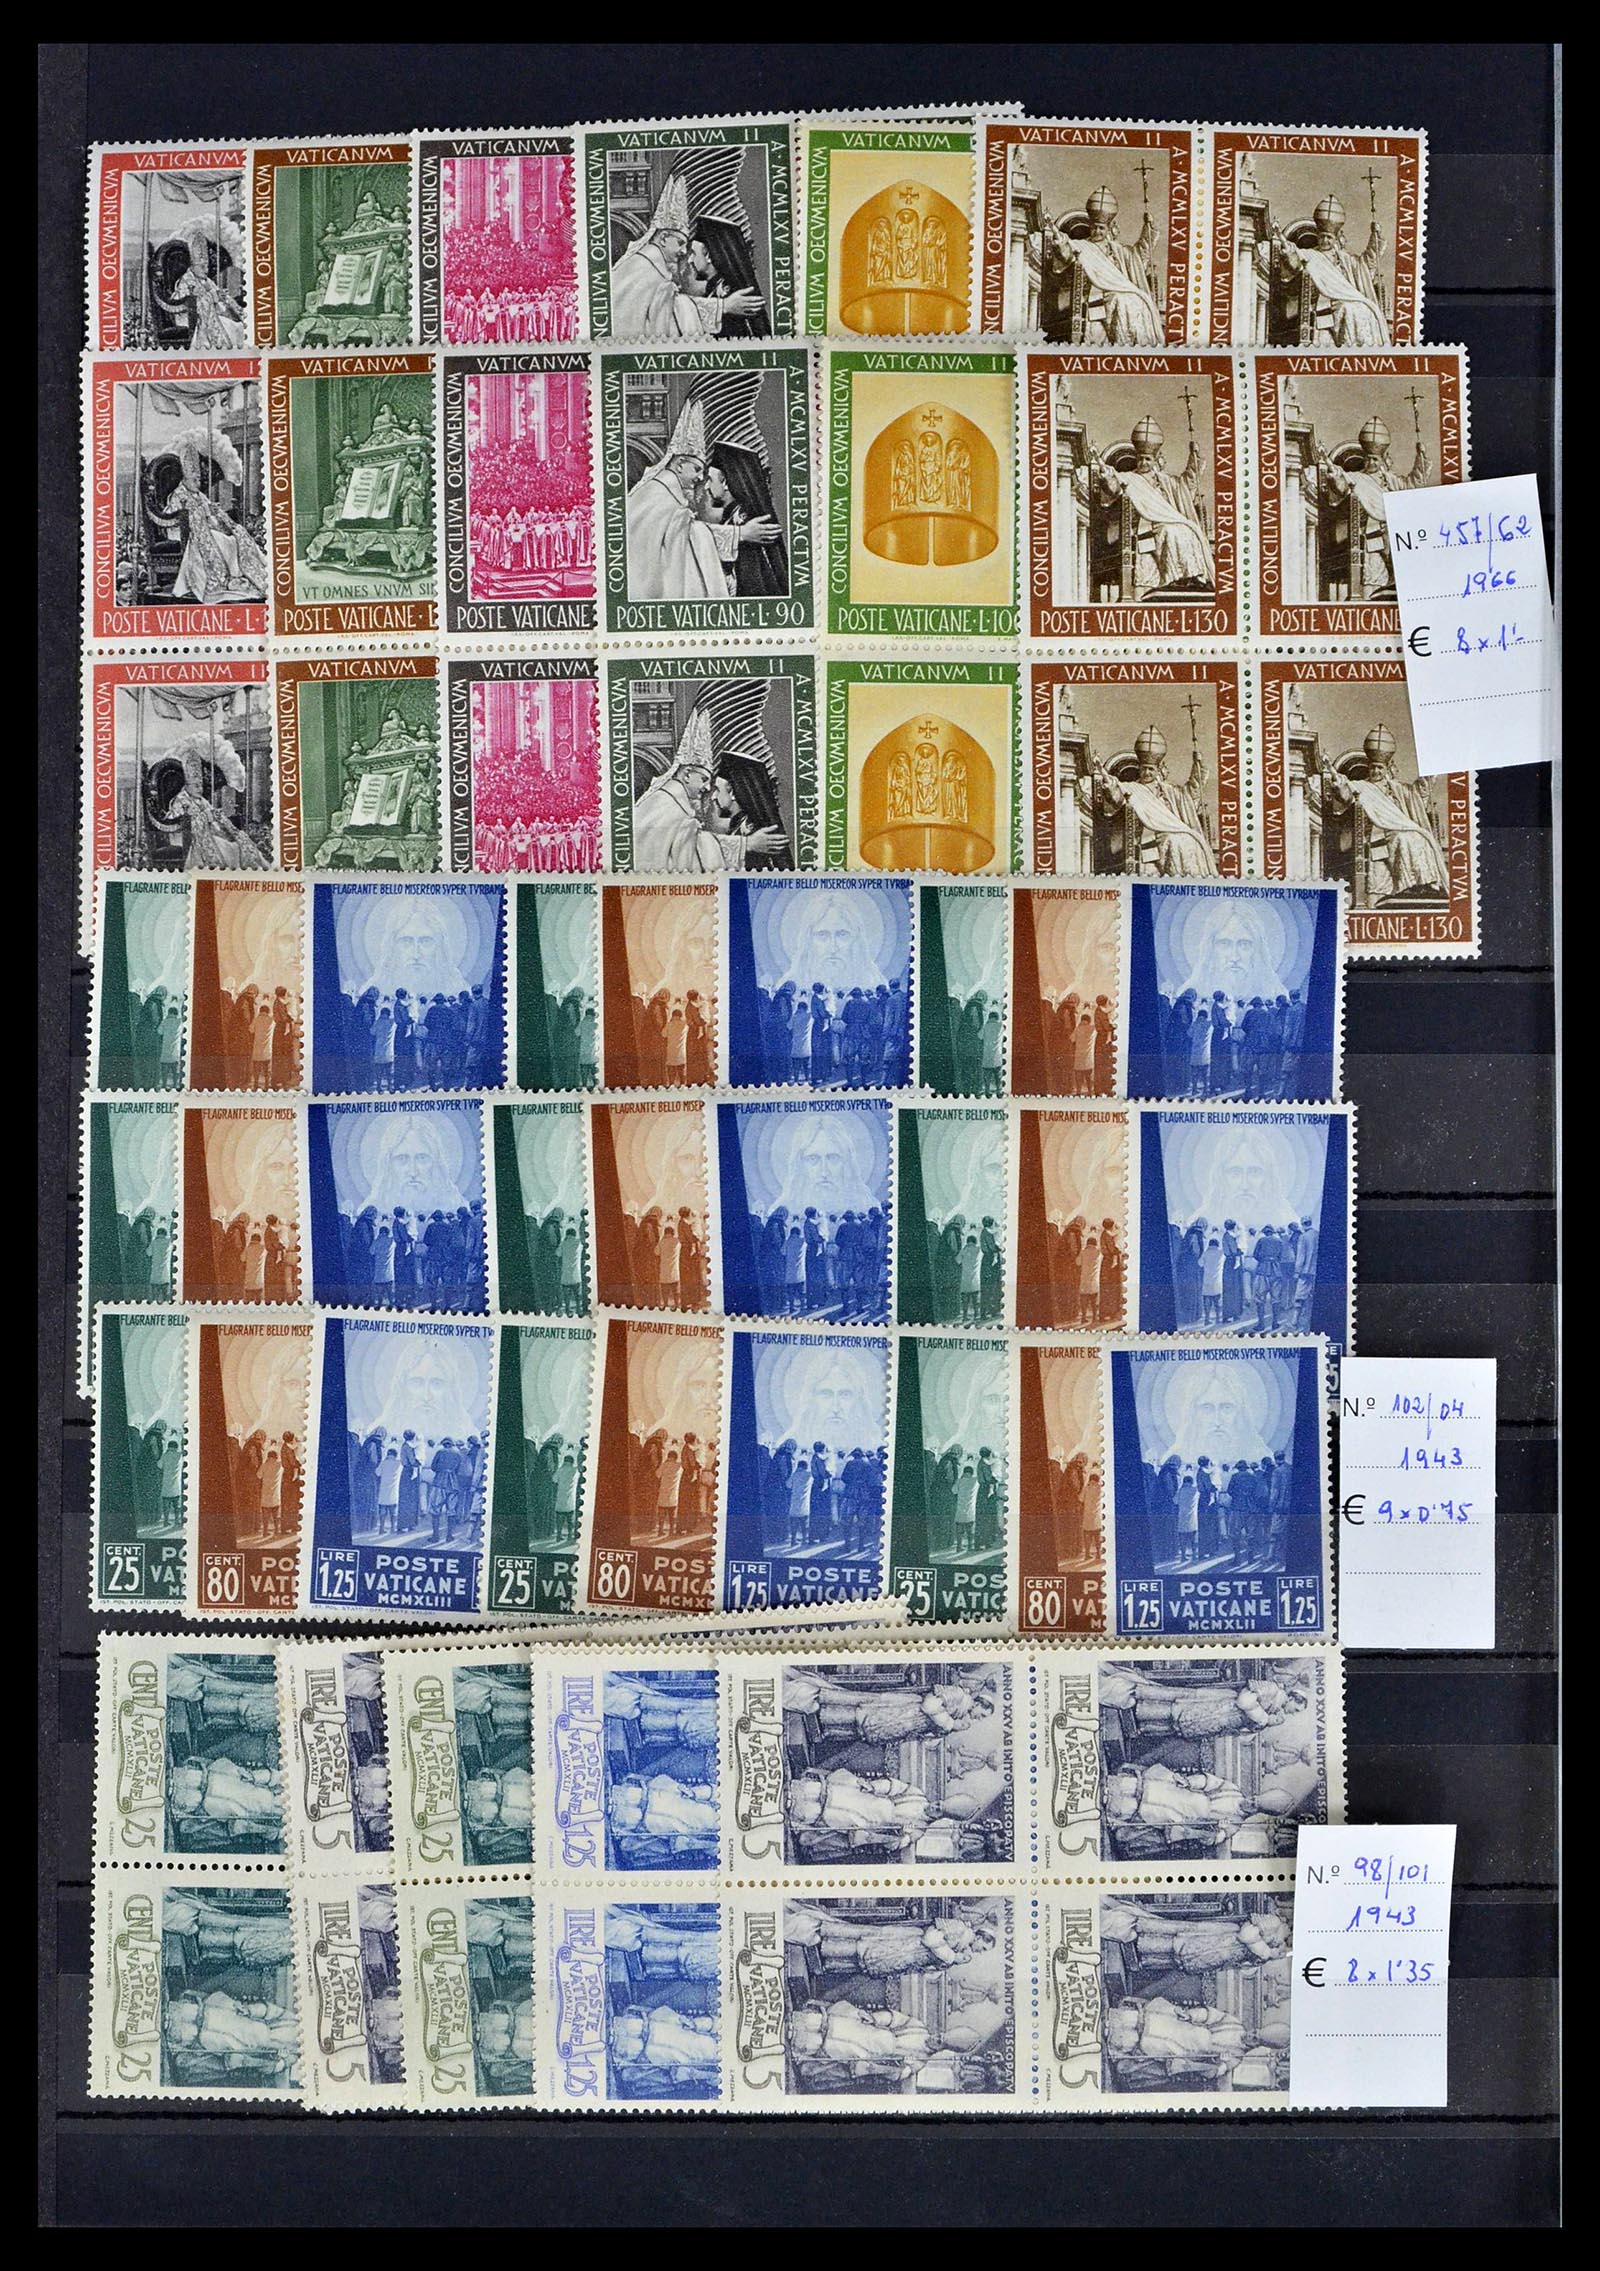 39236 0020 - Stamp collection 39236 European countries 40s-60s.